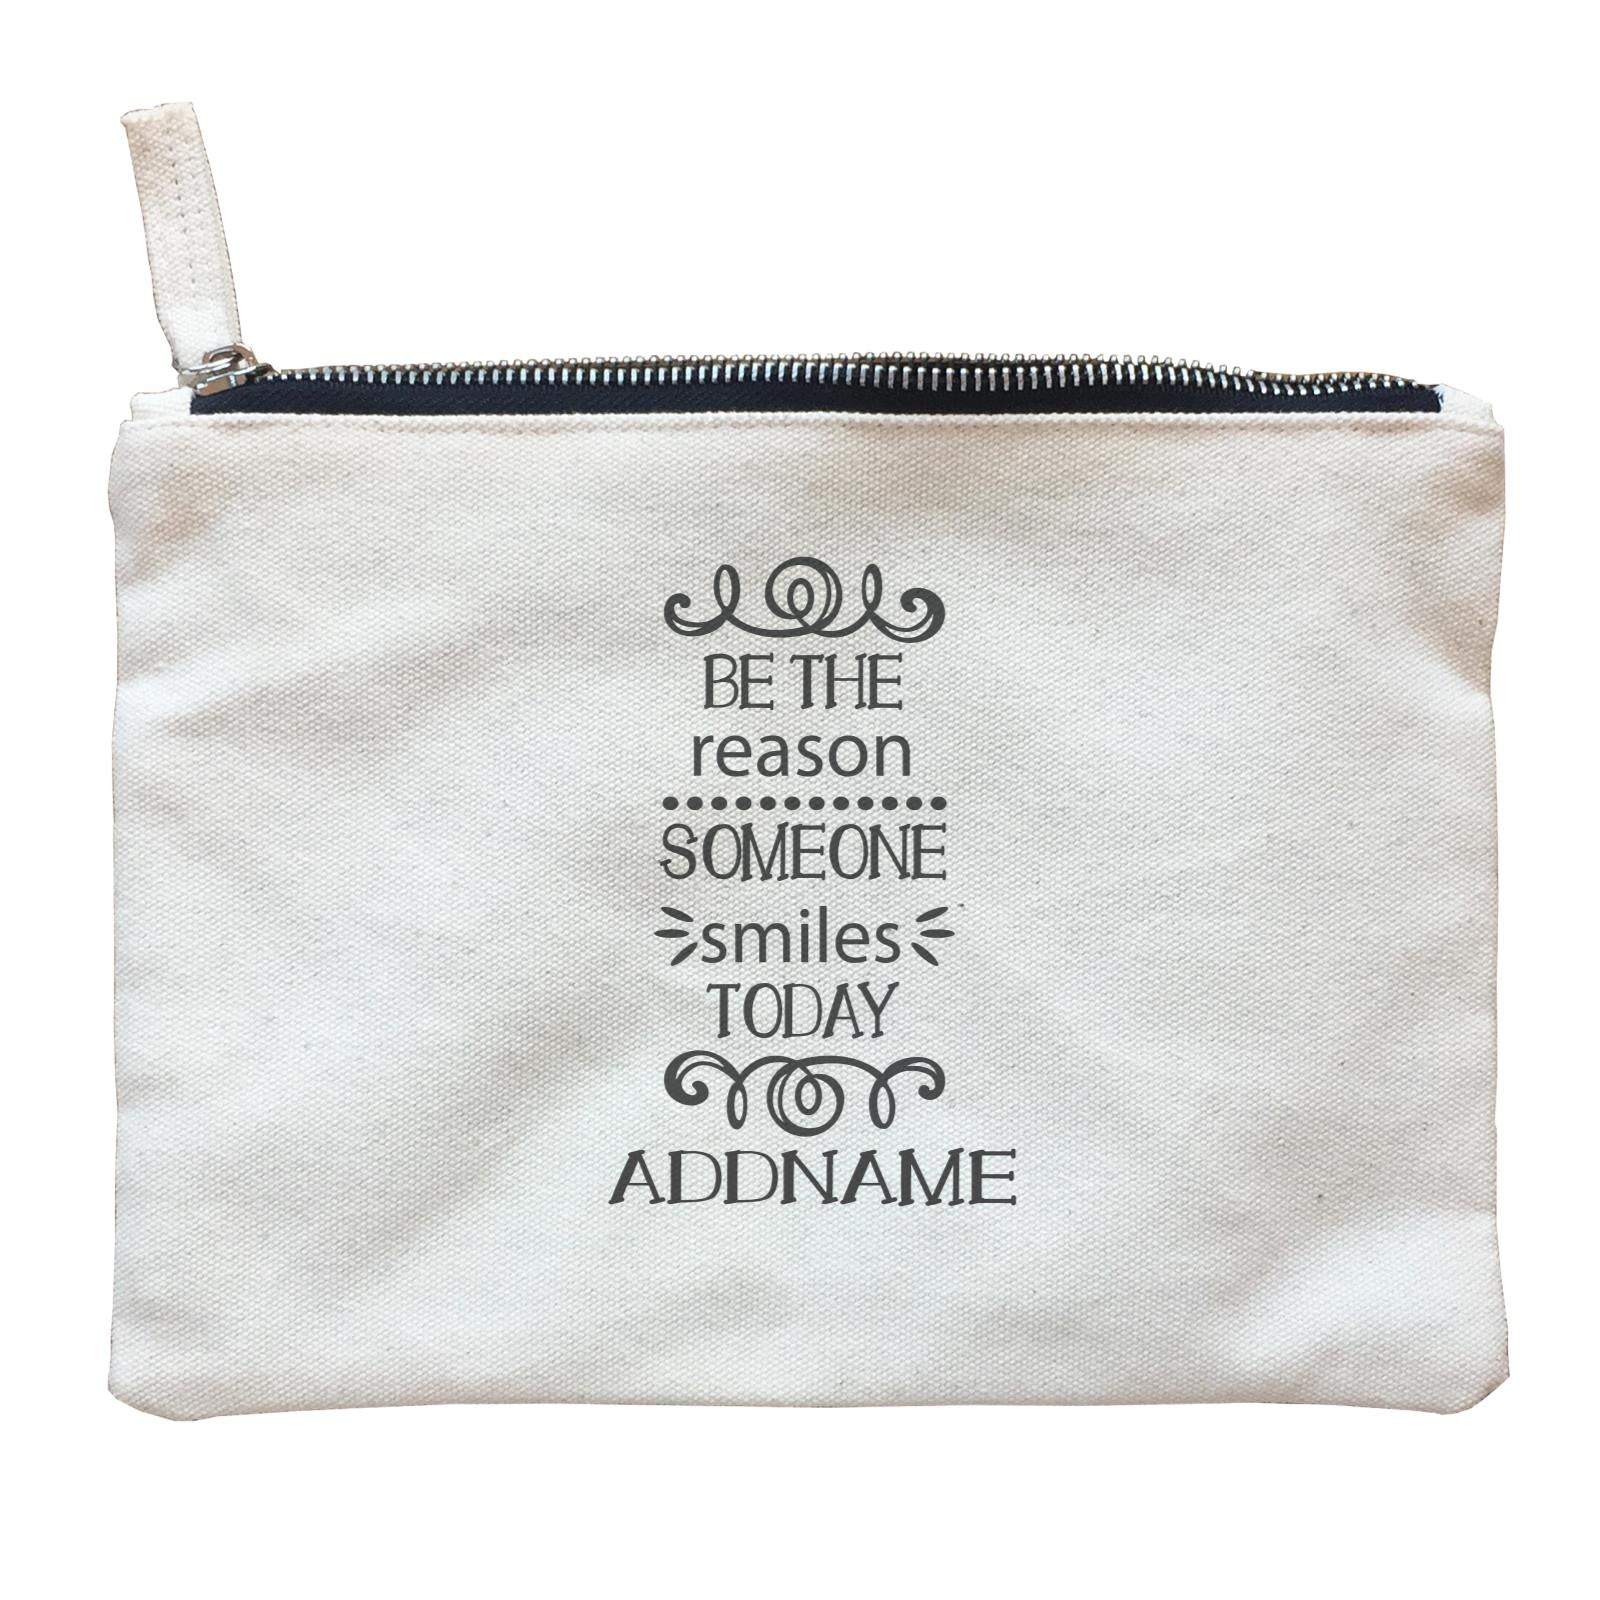 Inspiration Quotes Be The Reason Someone Smiles Today Addname Zipper Pouch